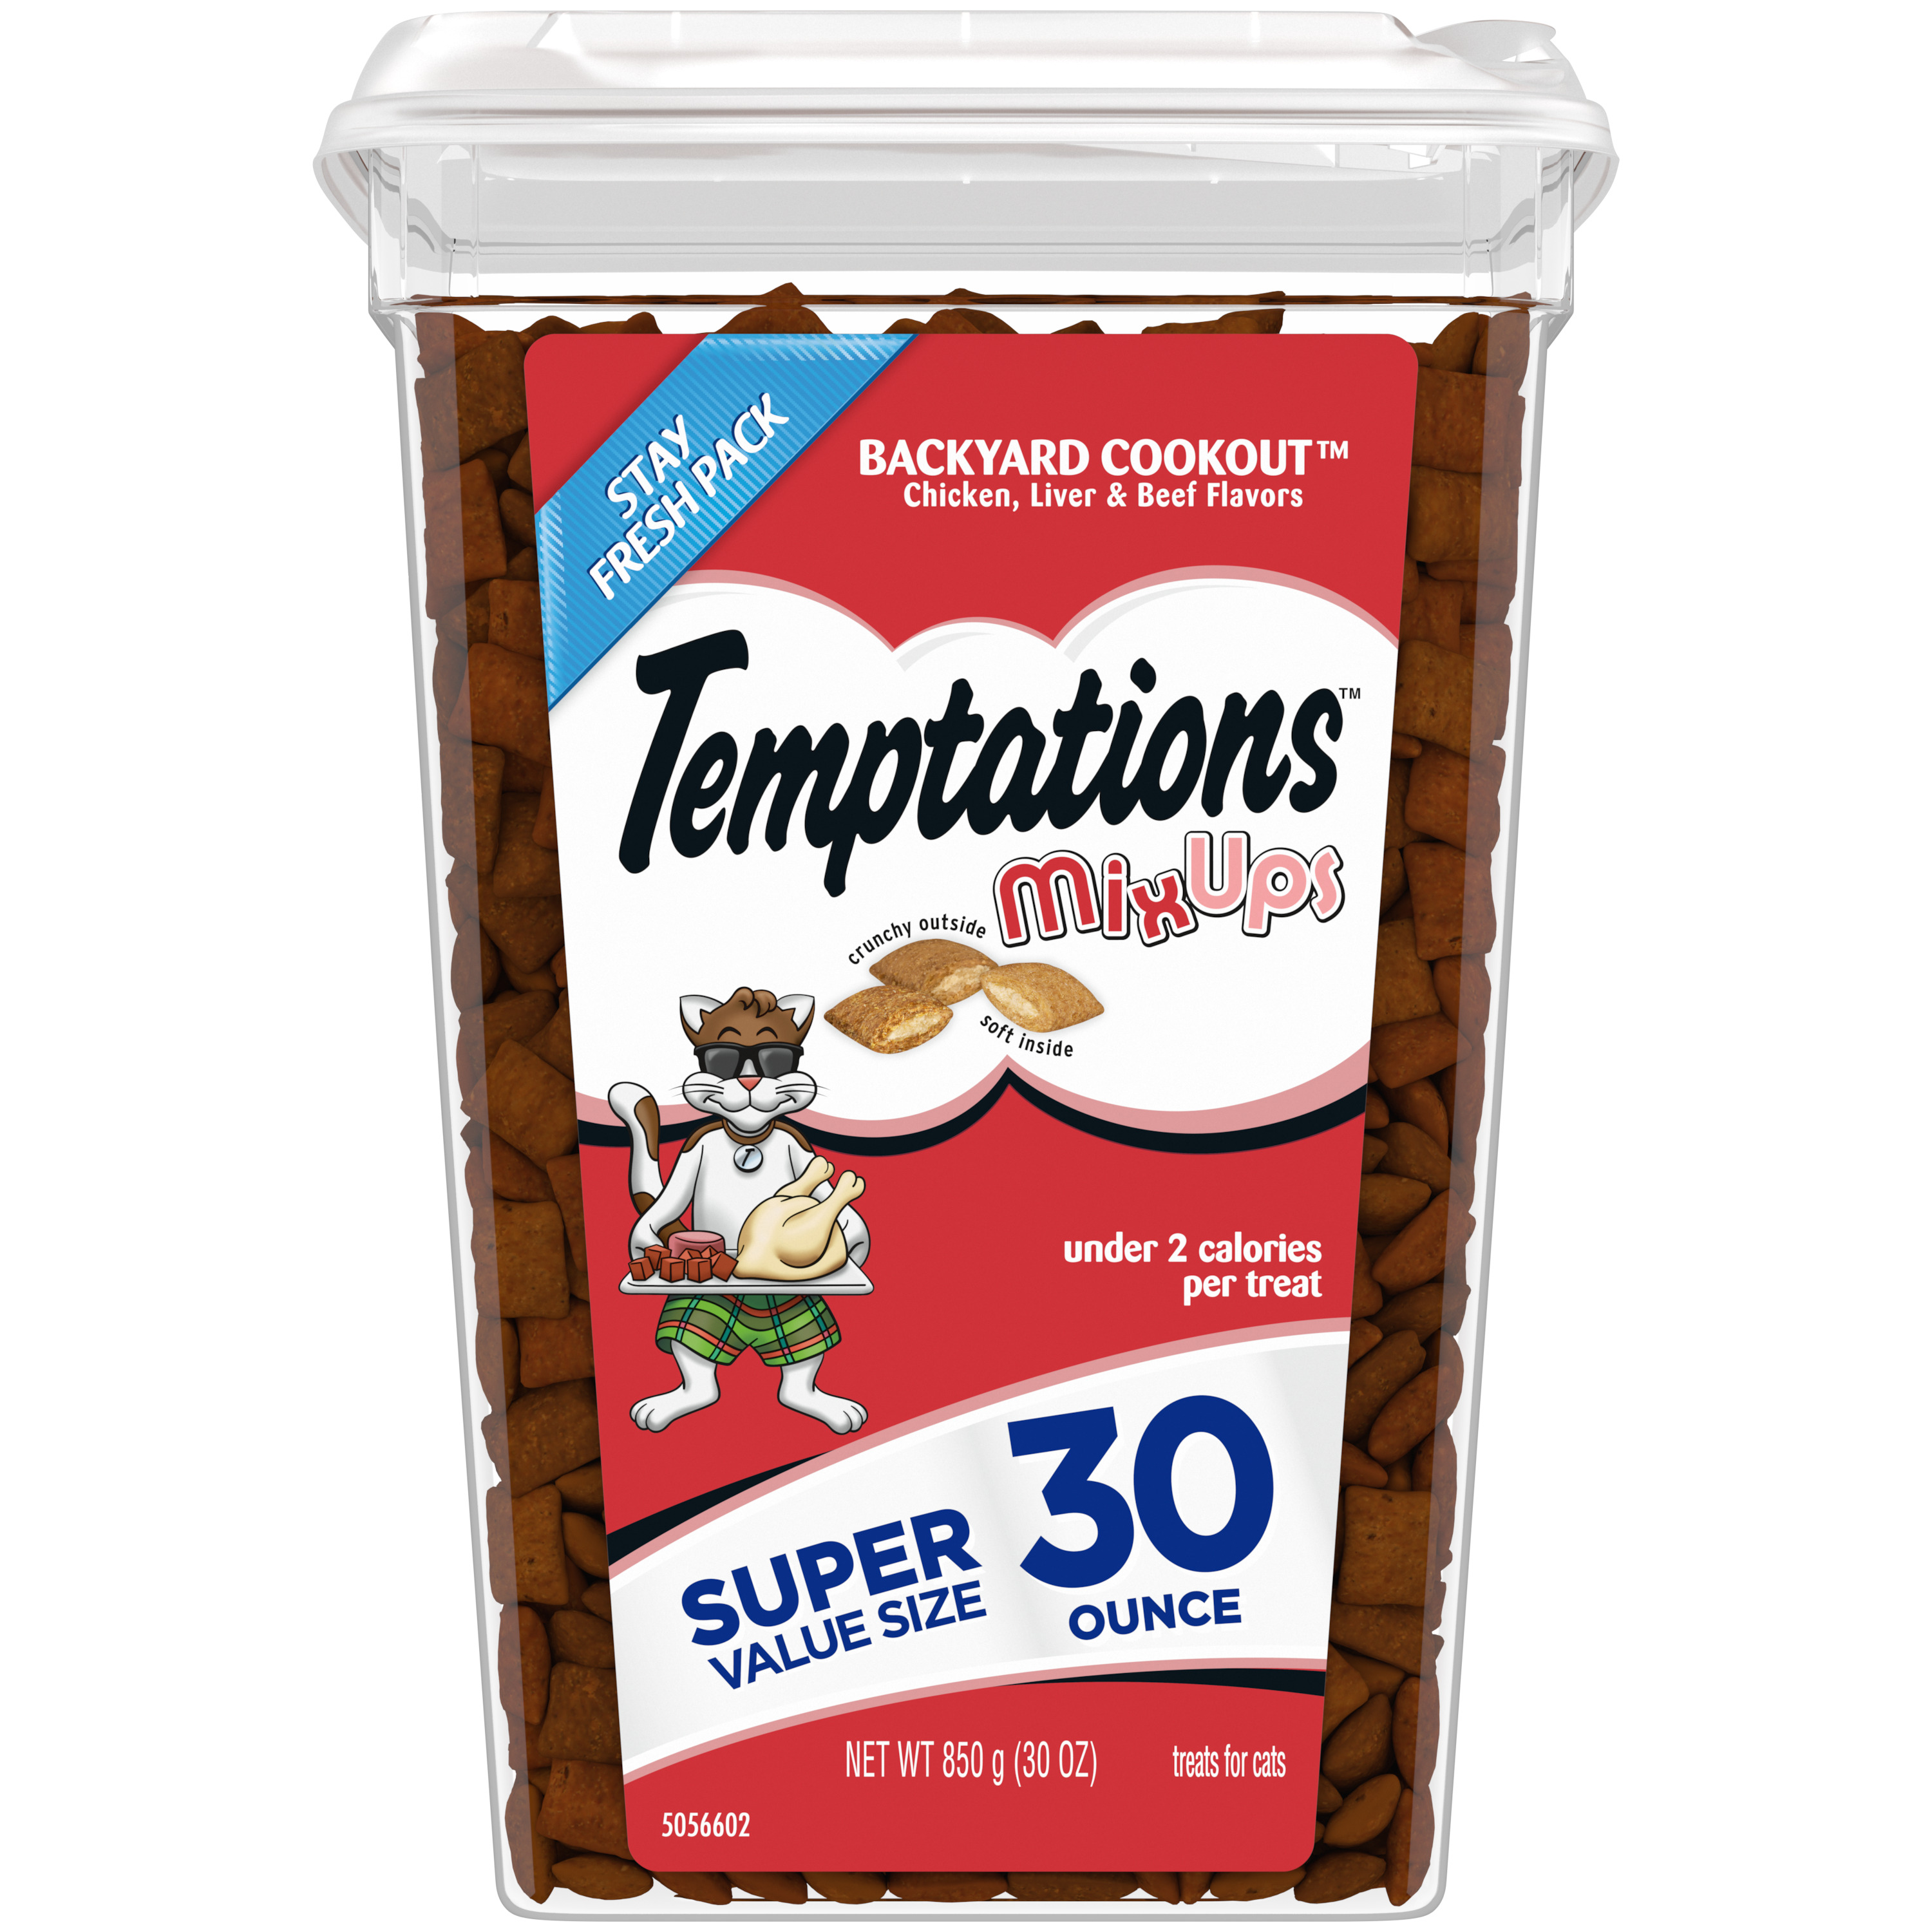 30 oz. Whiskas Temptations Backyard Cookout - Health/First Aid